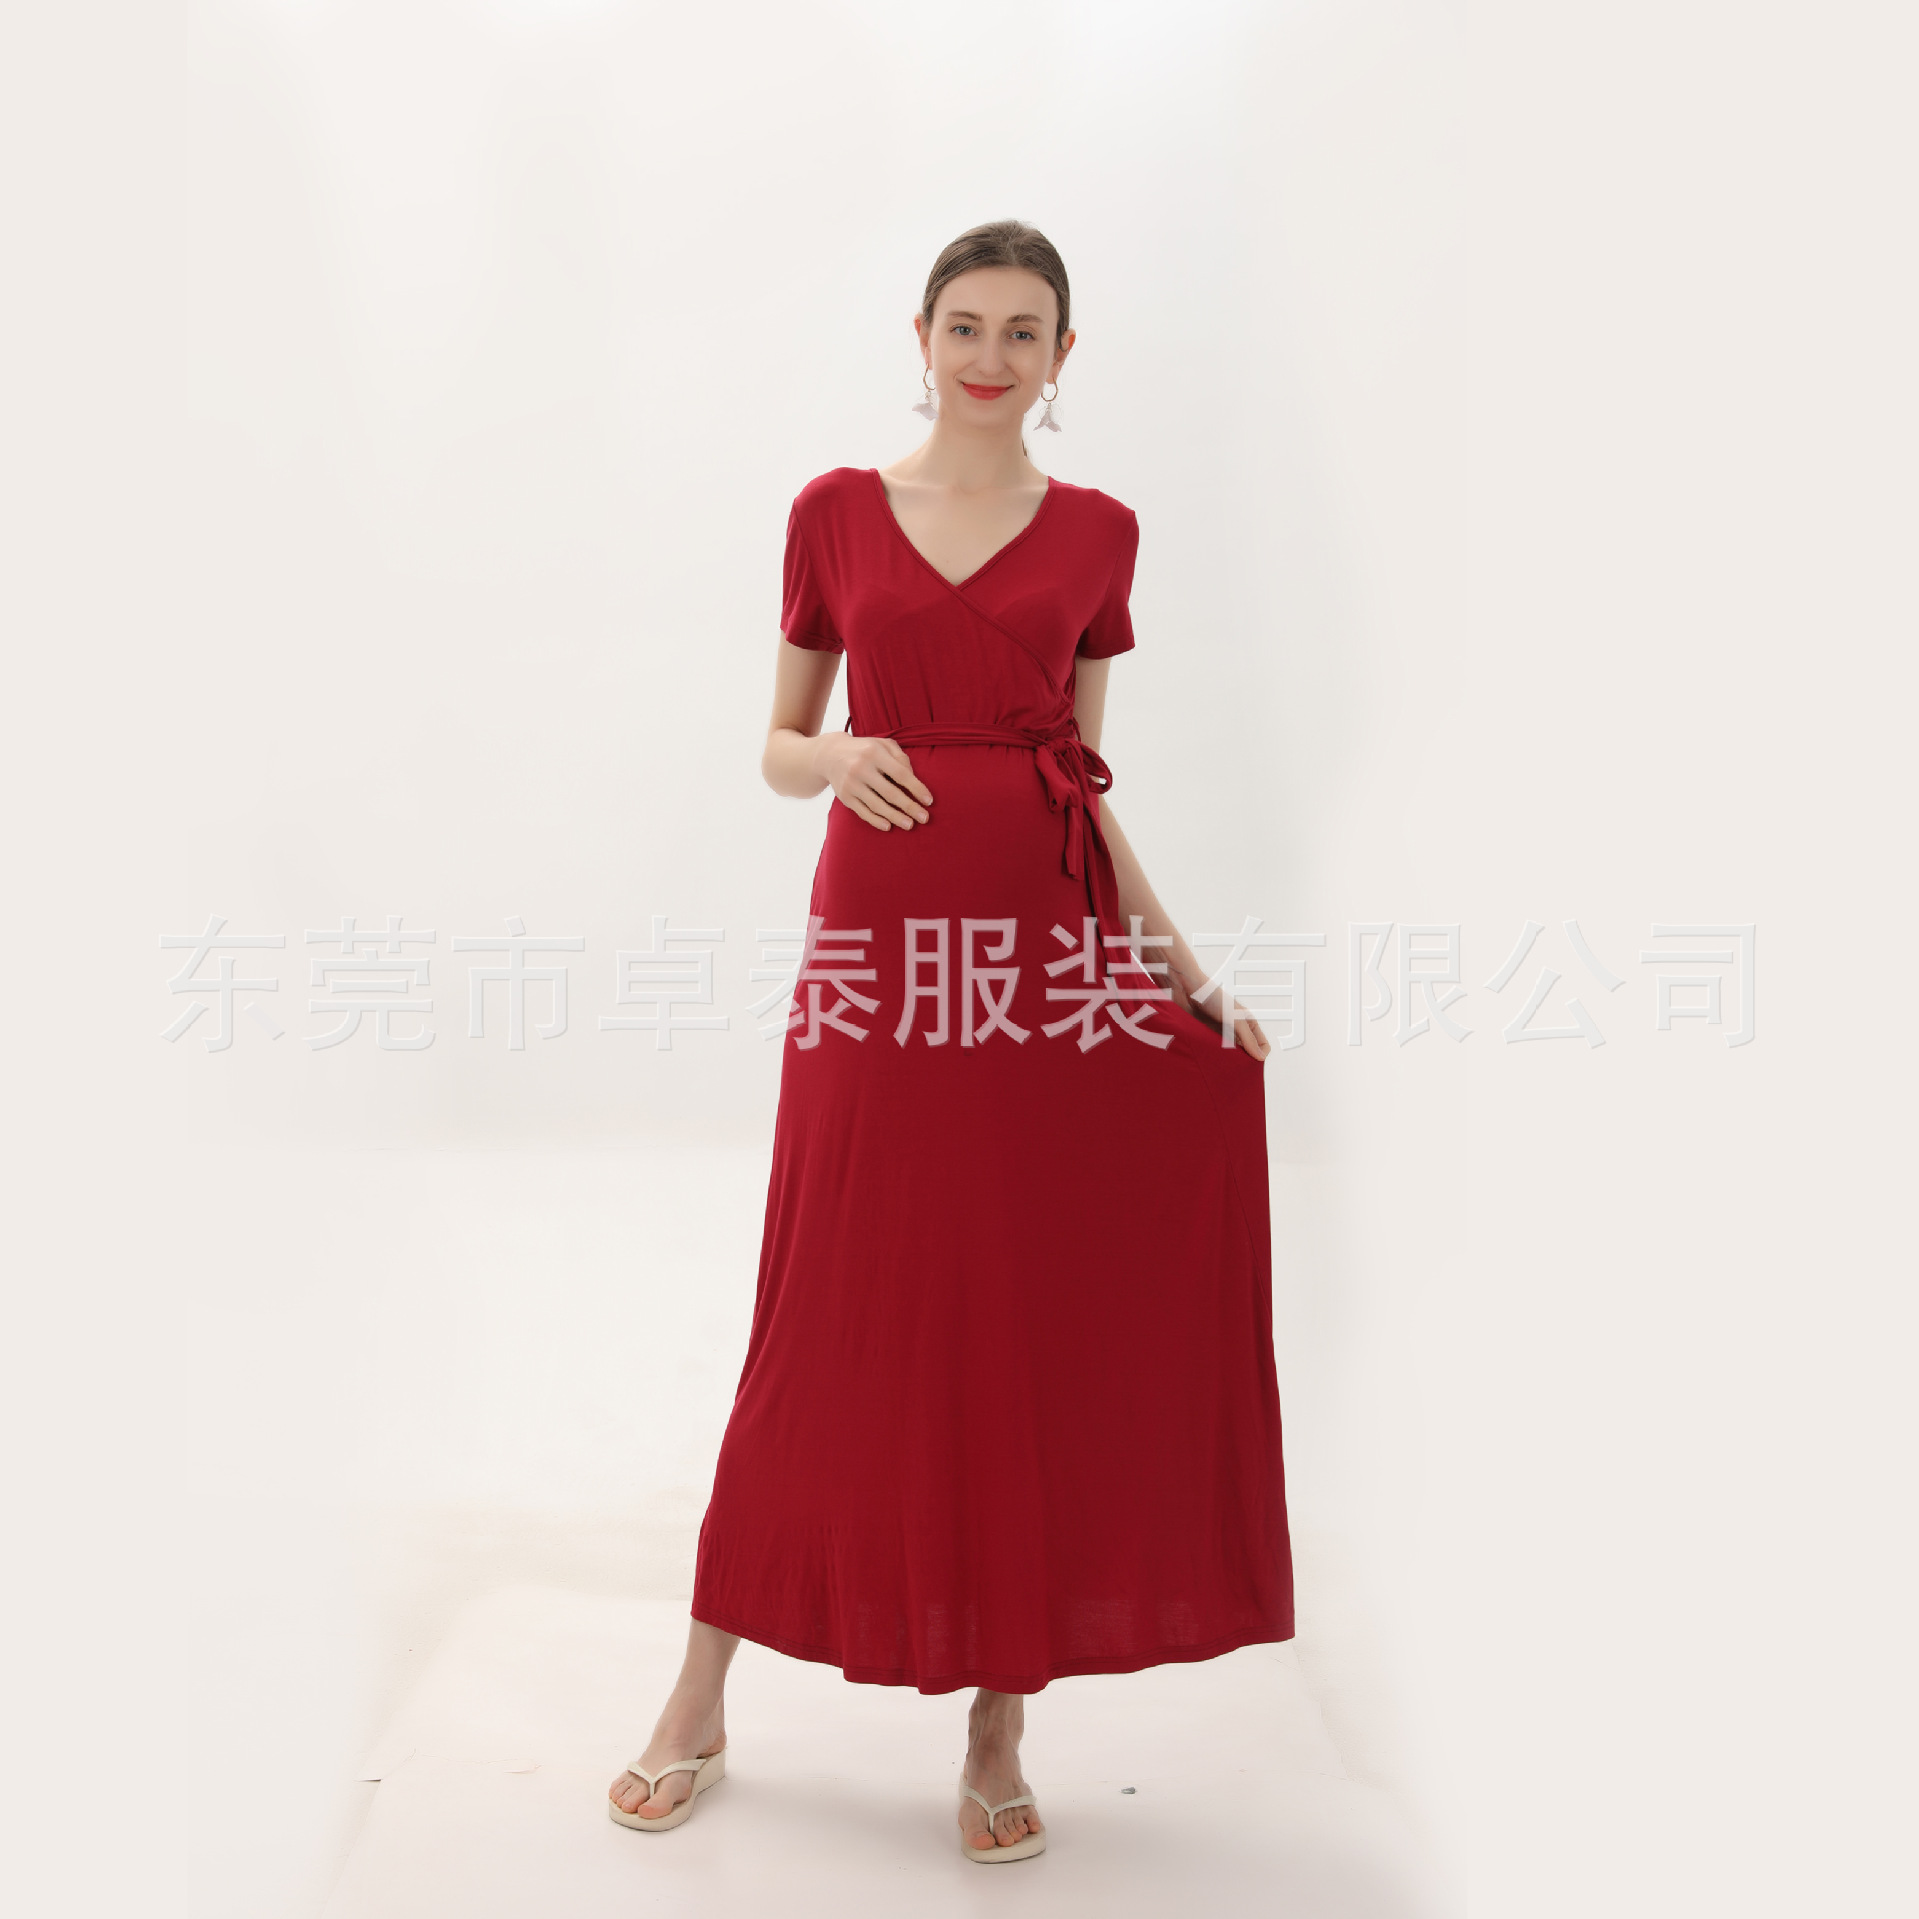 Manufacturers stock 2022 new cross-border European and American solid color print short sleeve V-neck maternity burgundy dress